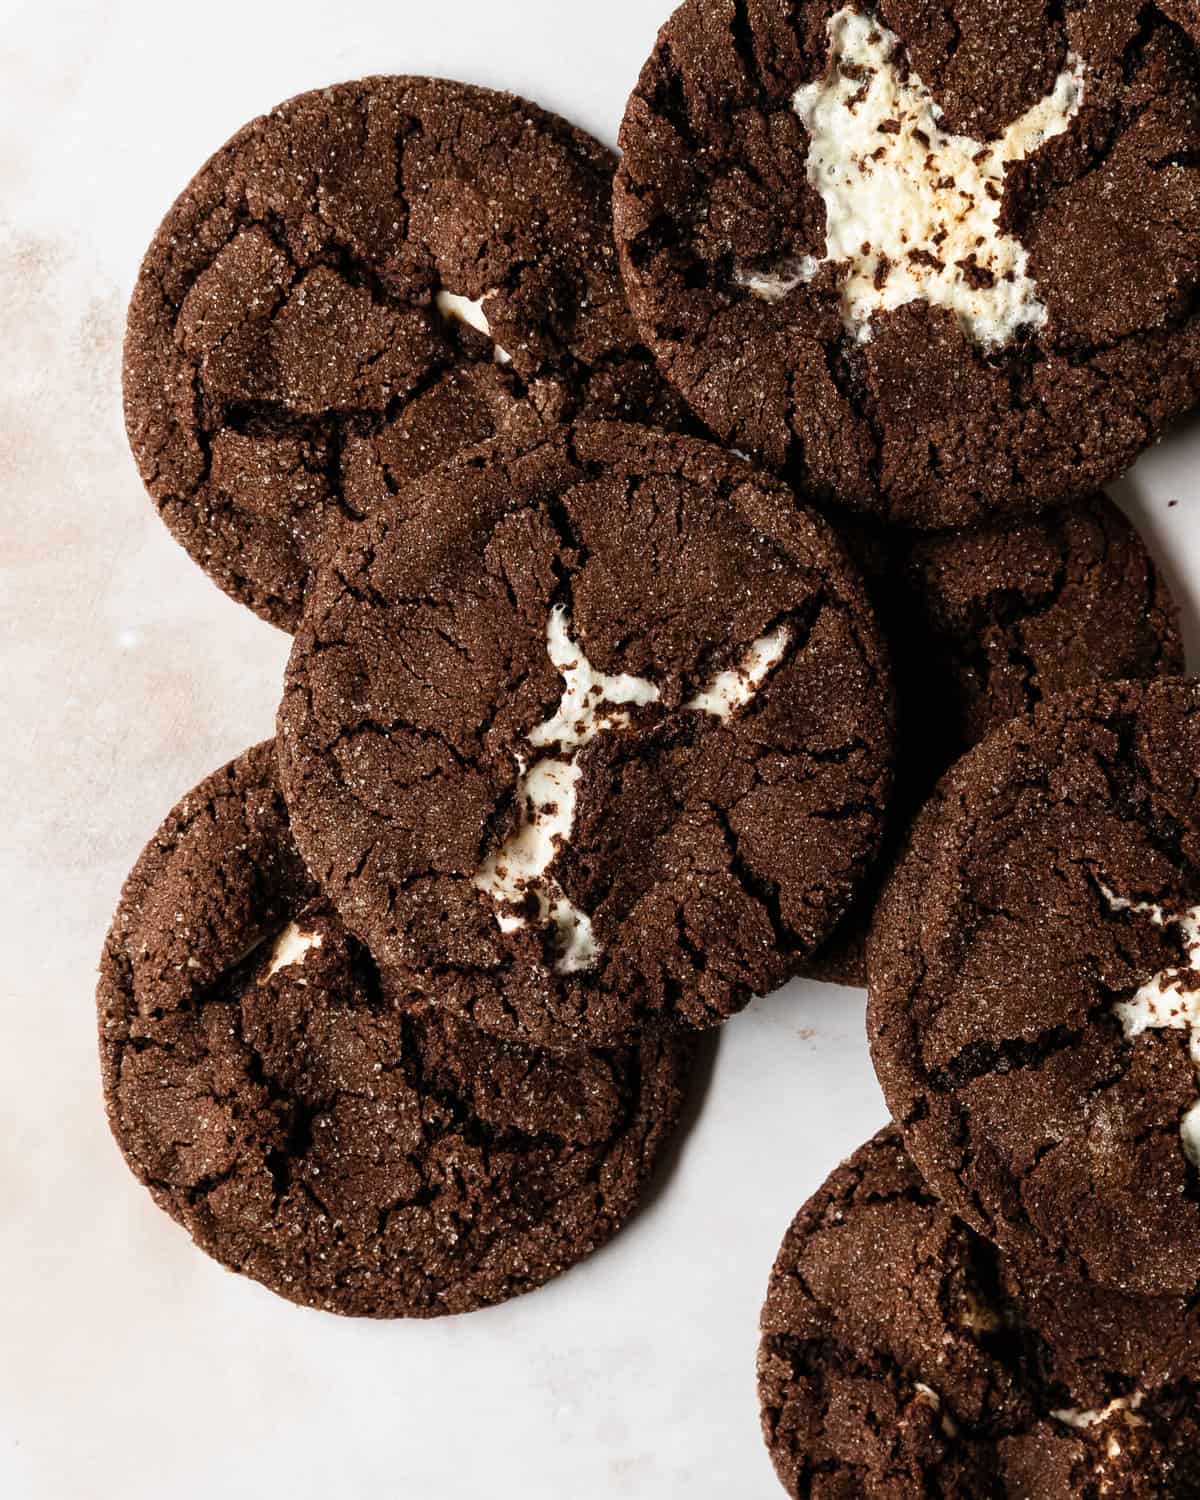 Chocolate marshmallow cookies are fudgy and chewy double chocolate sugar cookies filled with gooey marshmallows, rolled in a sweet, crunchy sugar coating. These marshmallow cookies are incredibly quick and easy to make and taste just like your favorite hot cocoa with marshmallows.